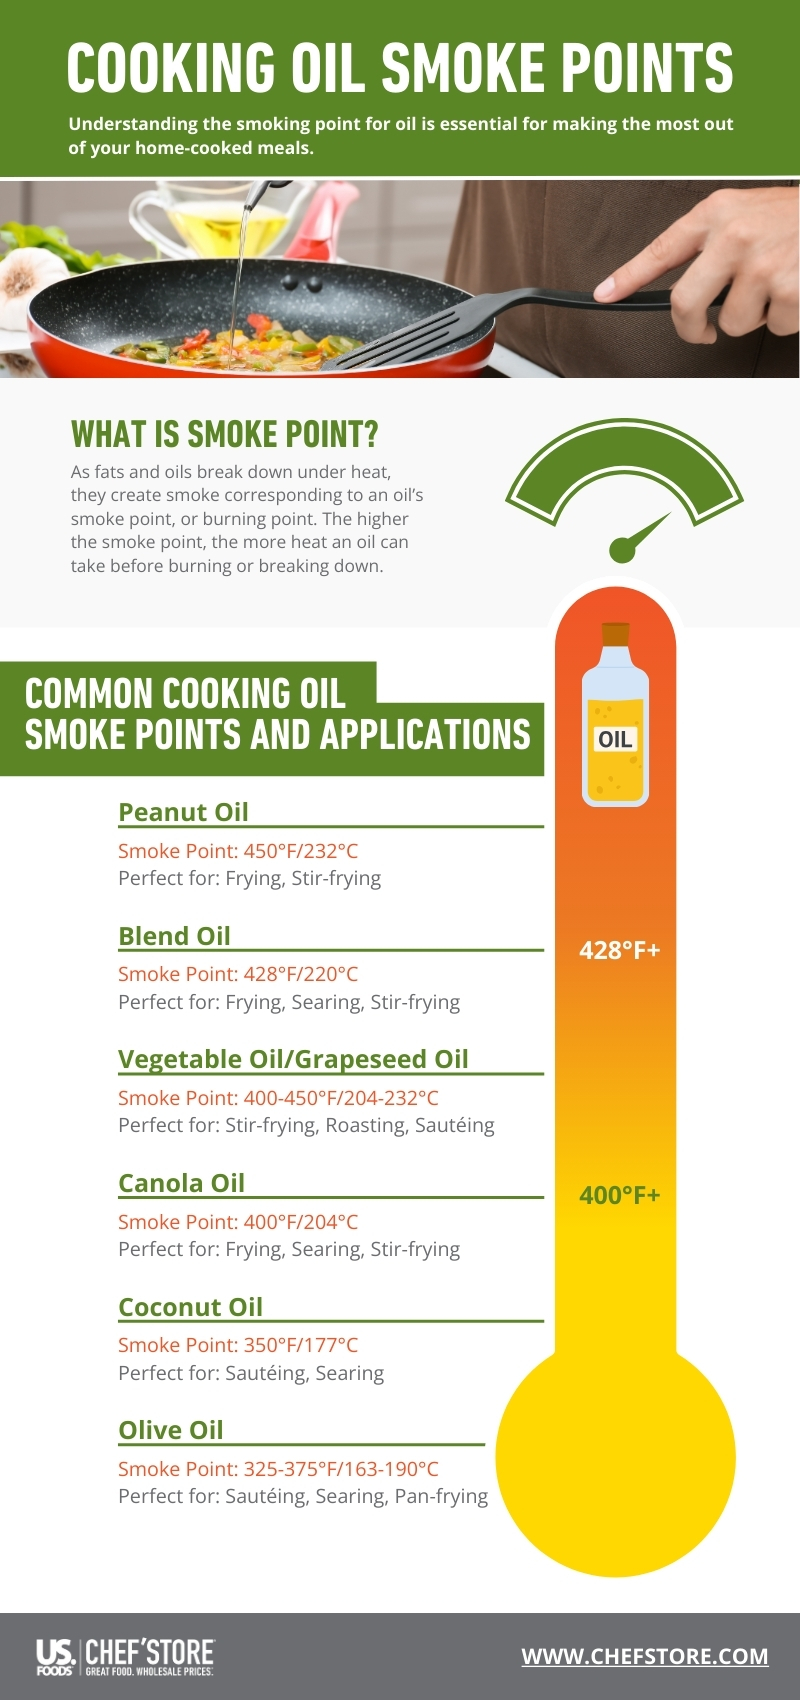 “cooking-oil-smoke-points” title=“Cooking Oil Smoke Points